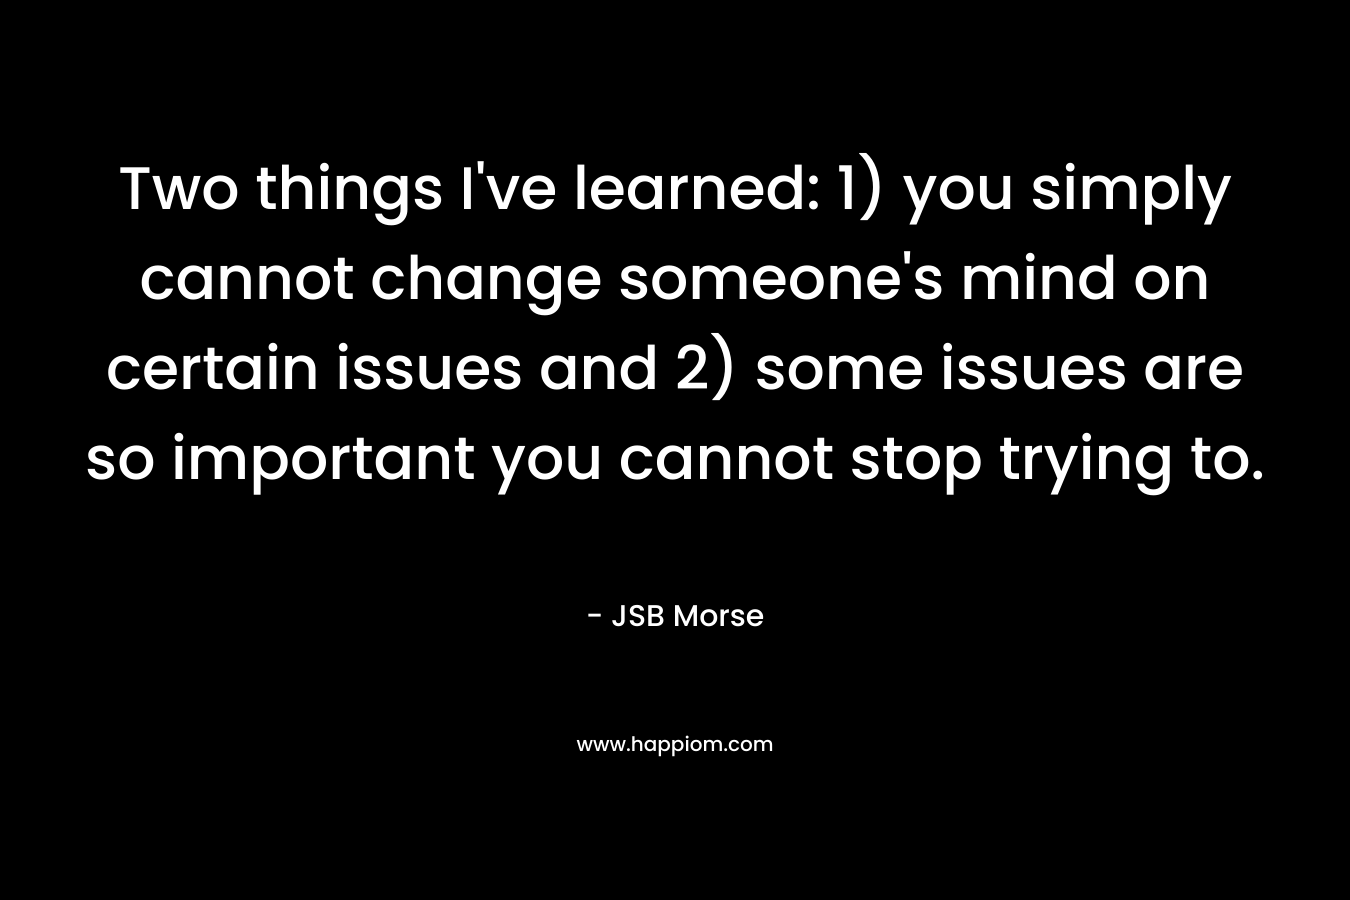 Two things I’ve learned: 1) you simply cannot change someone’s mind on certain issues and 2) some issues are so important you cannot stop trying to. – JSB Morse